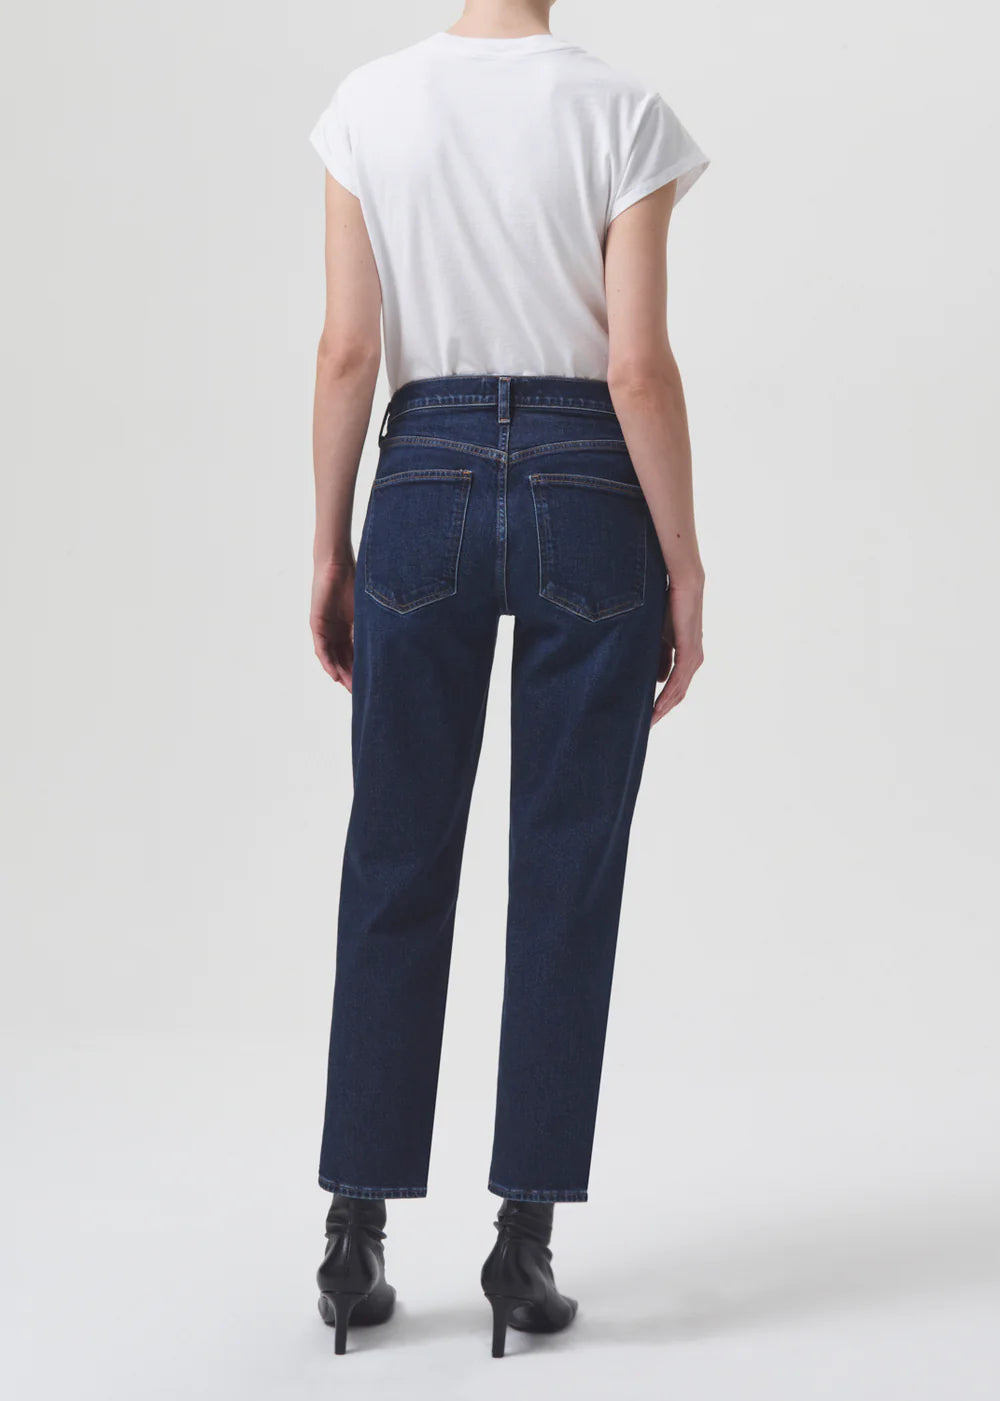 The back view of a woman wearing a white t-shirt and jeans with AGOLDE Kye Straight Crop - Song silhouette.